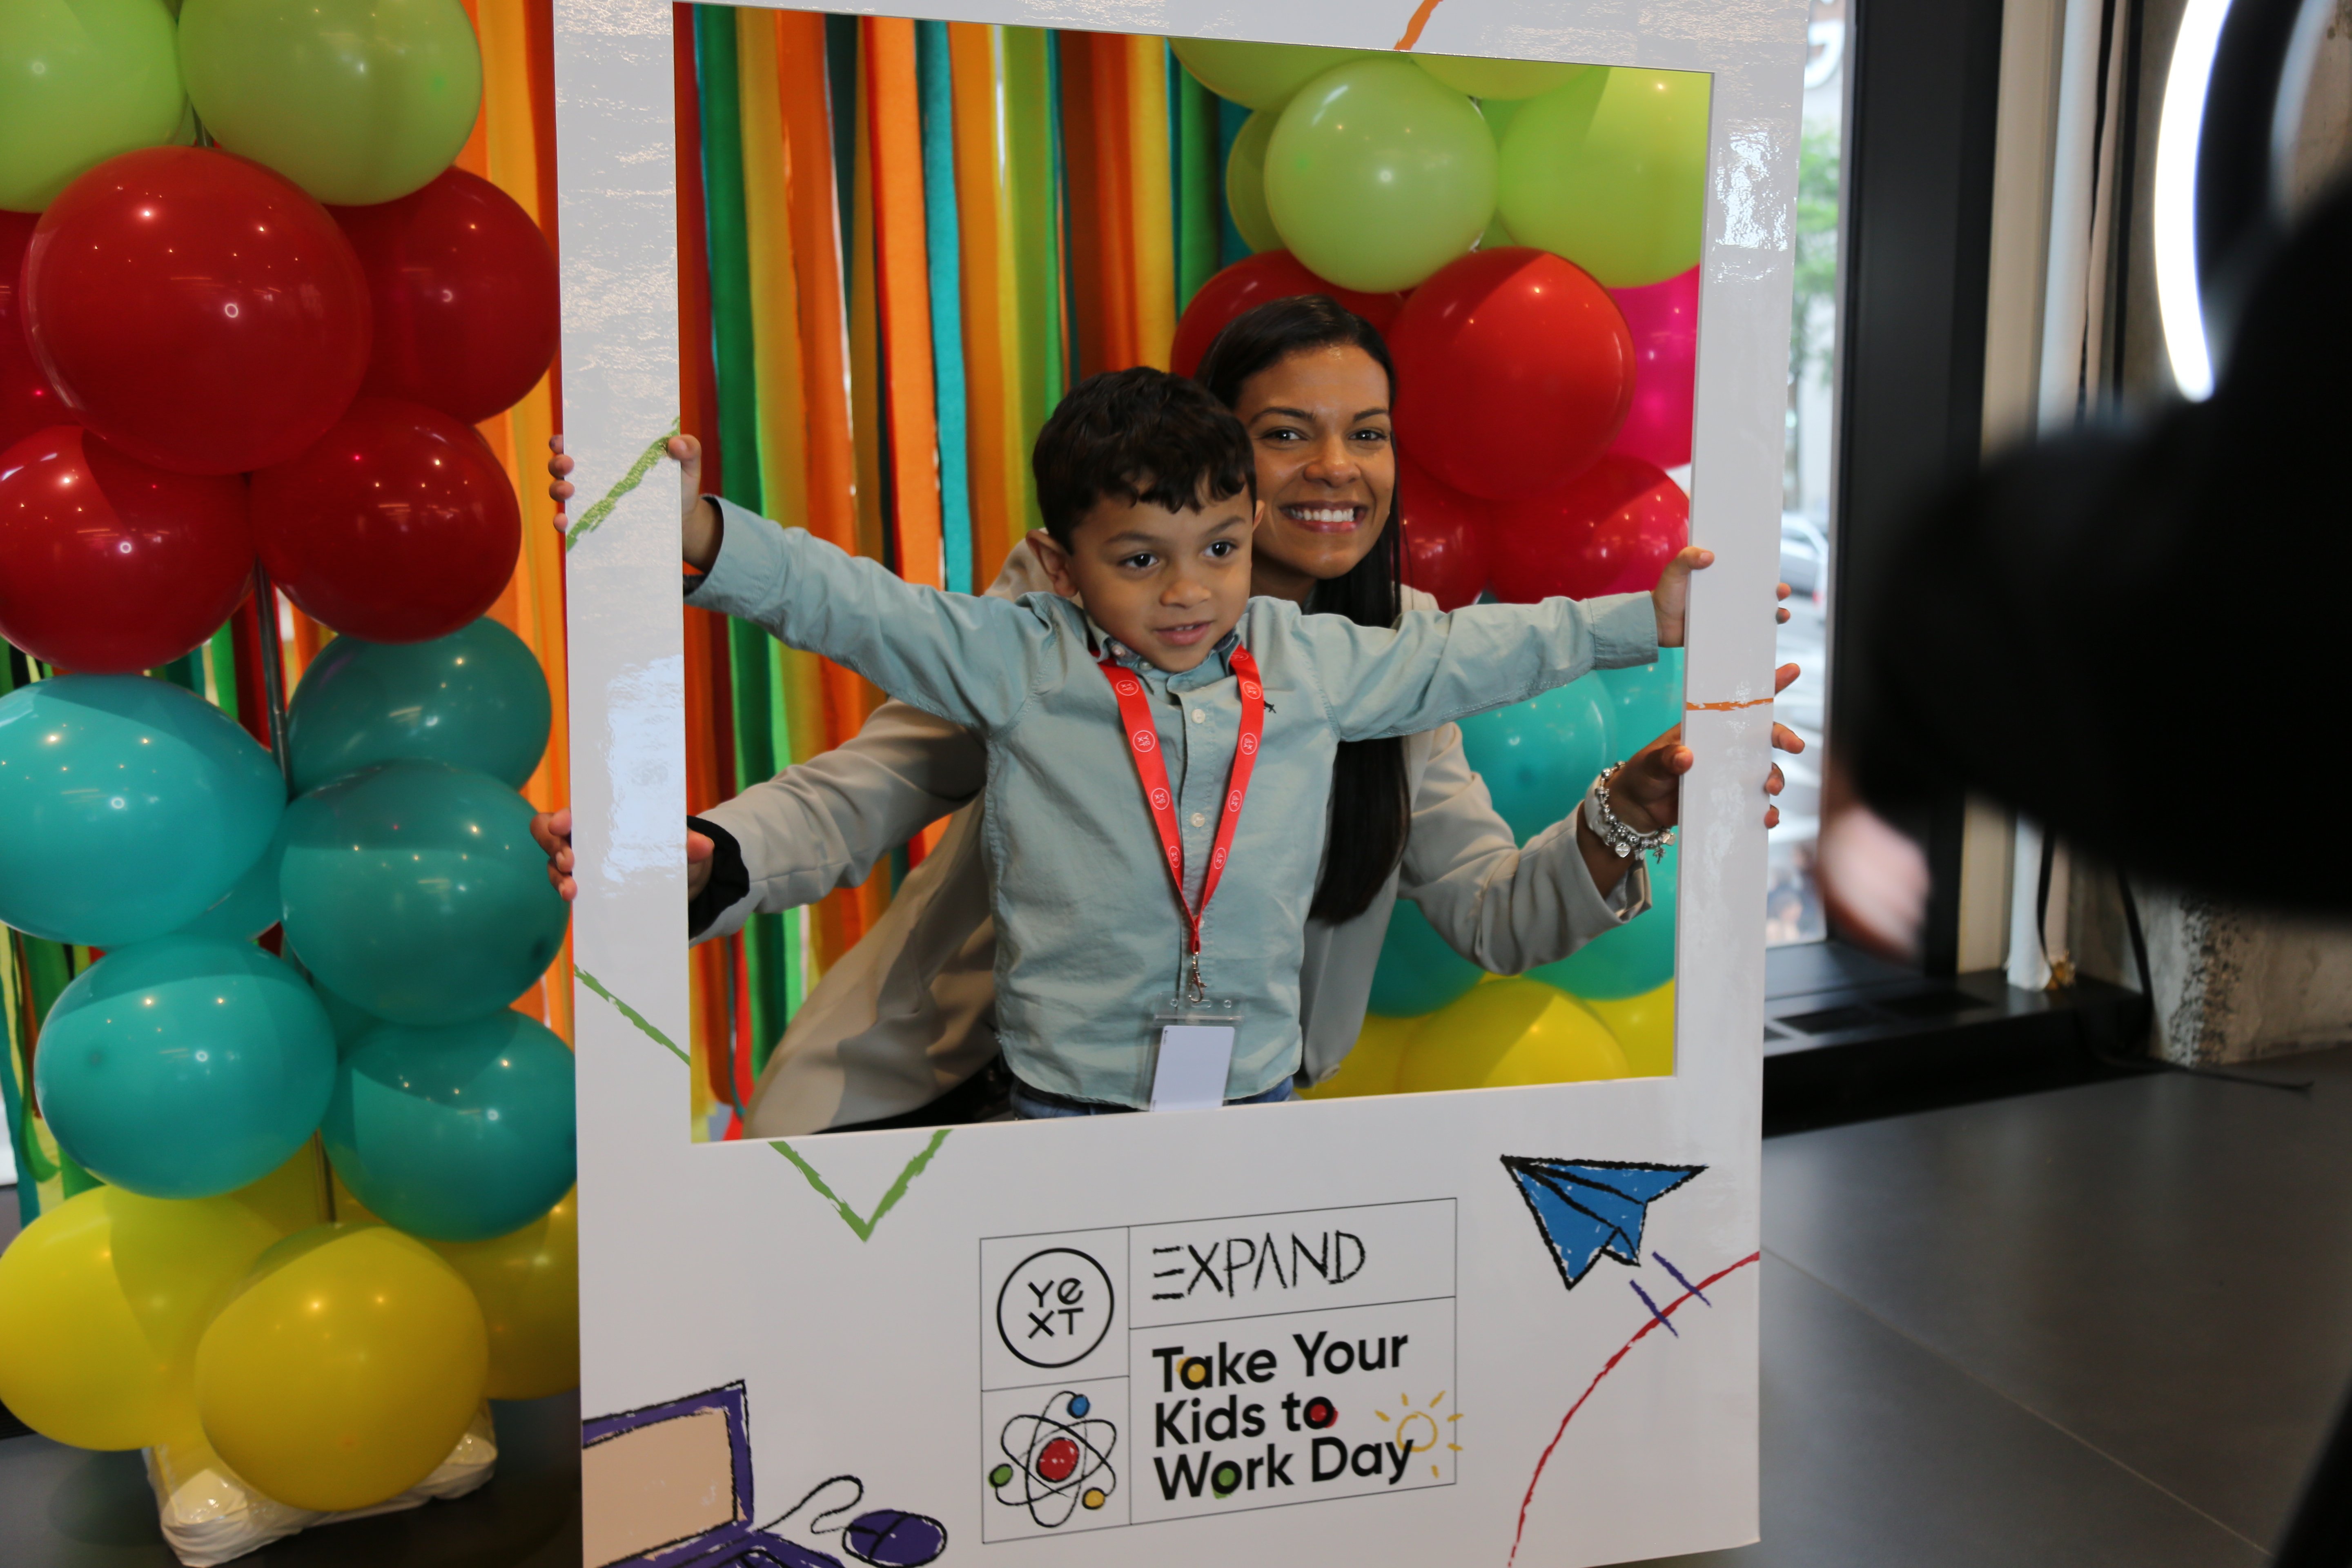 Candid photo of a mom and her son at a photo booth setup for Take  Your Kids to Work Day.